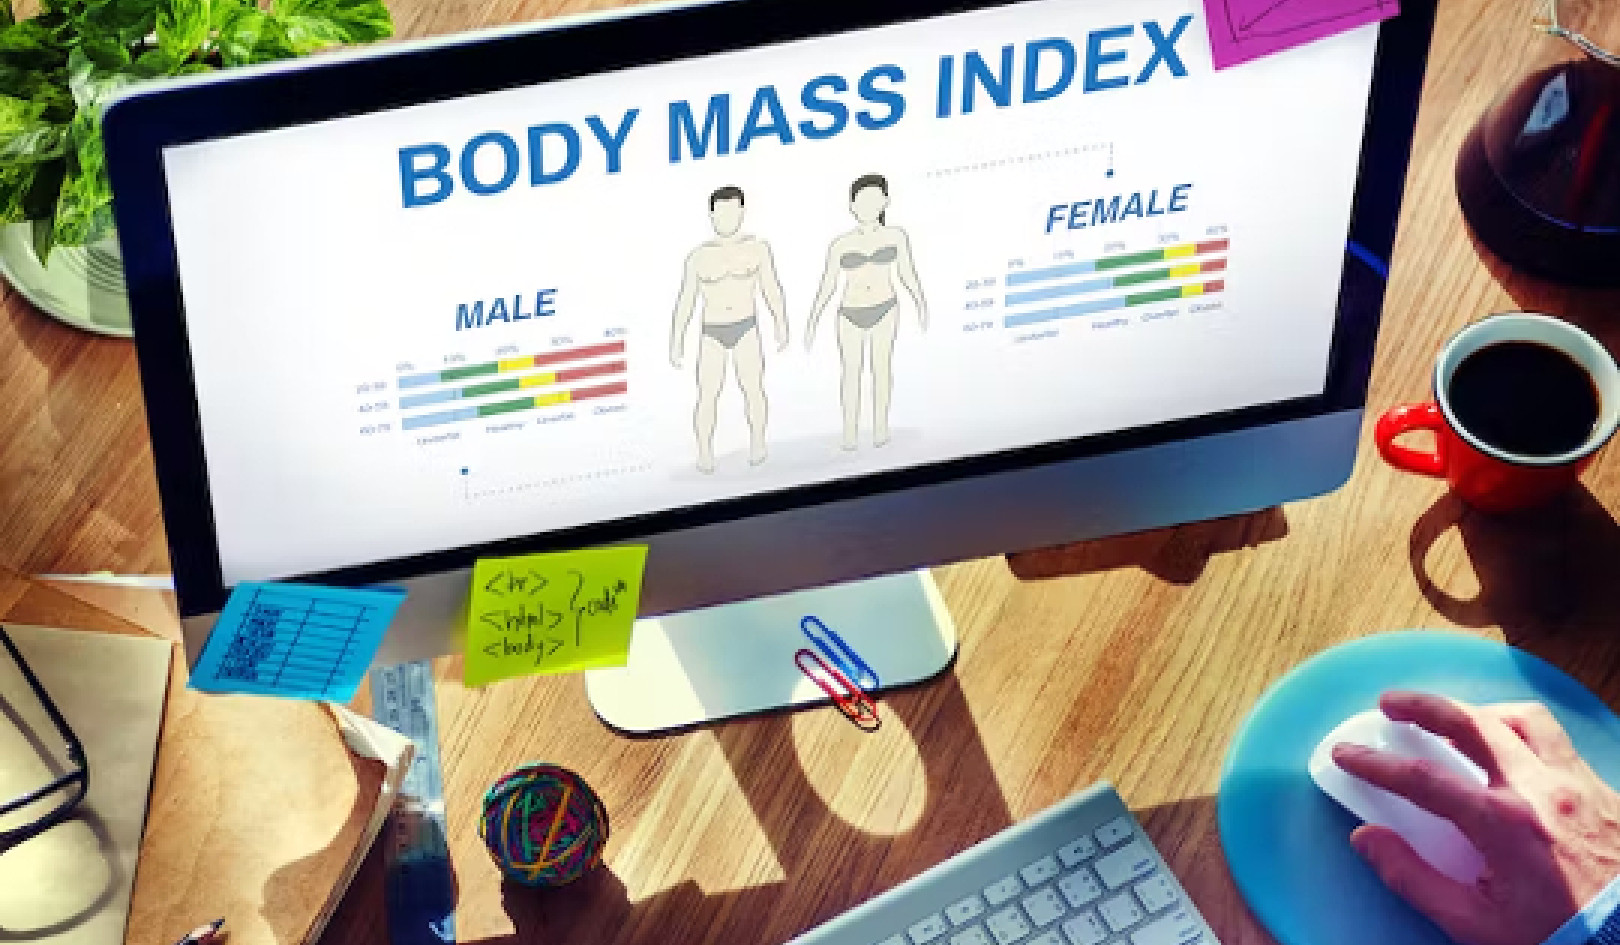 Why Practitioners Are Relying Less on Body Mass Index for Health Assessment